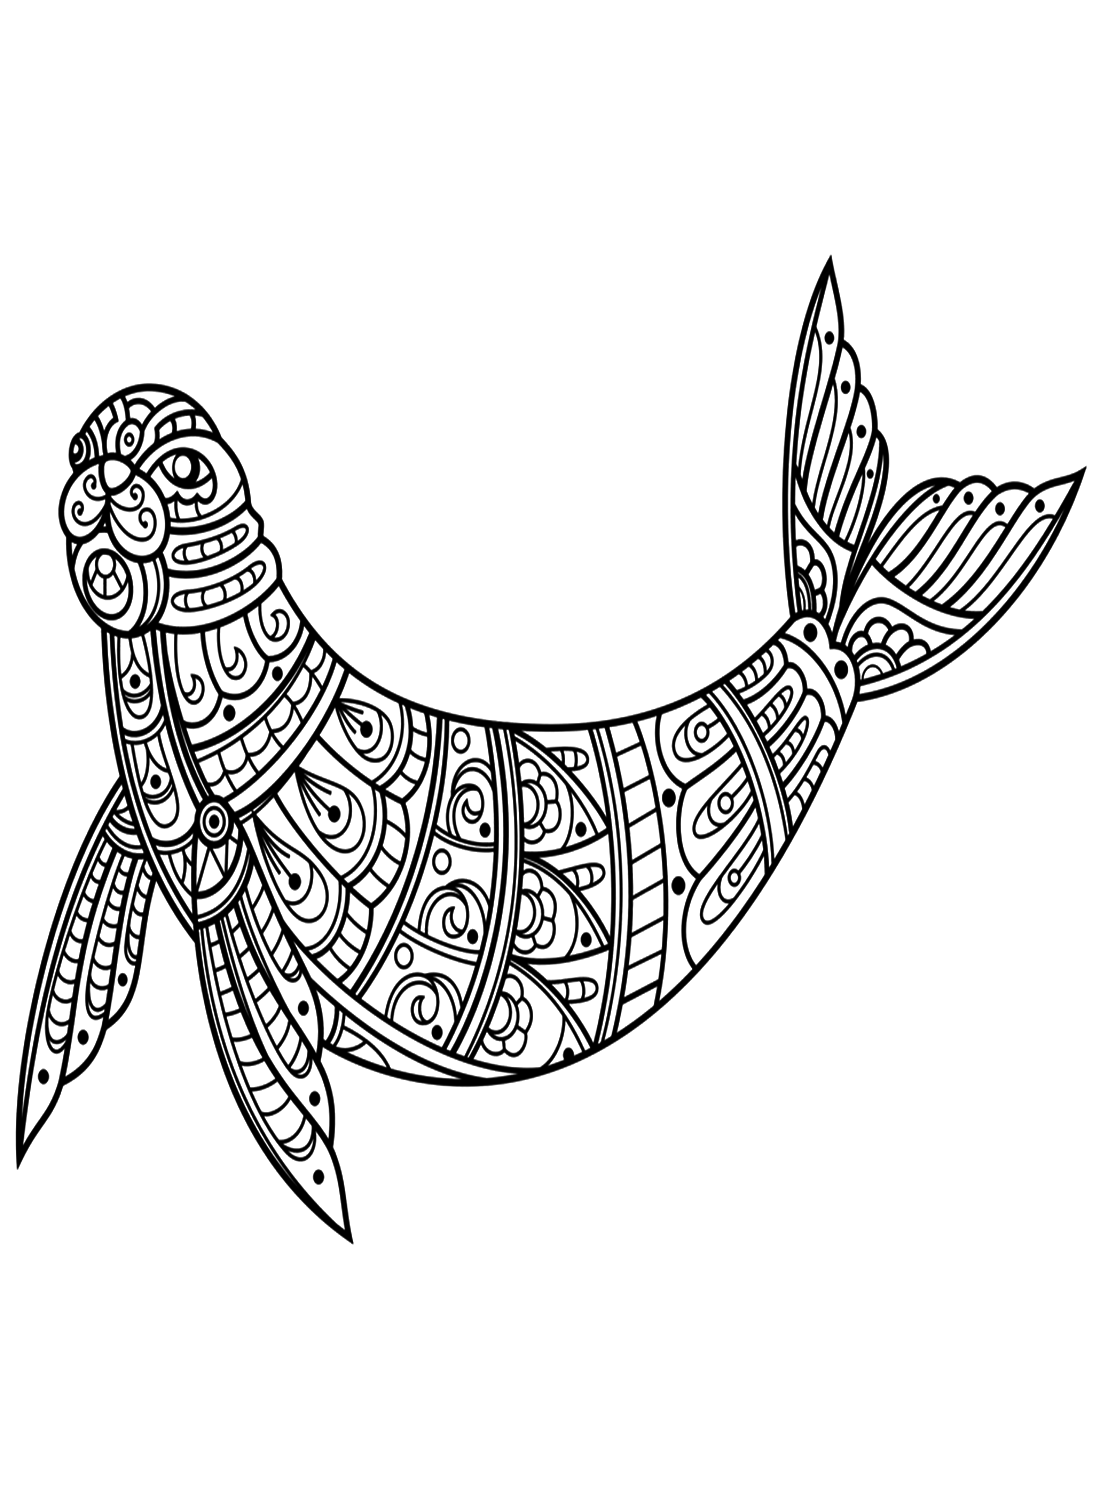 Seal In Zentangle Style from Seal